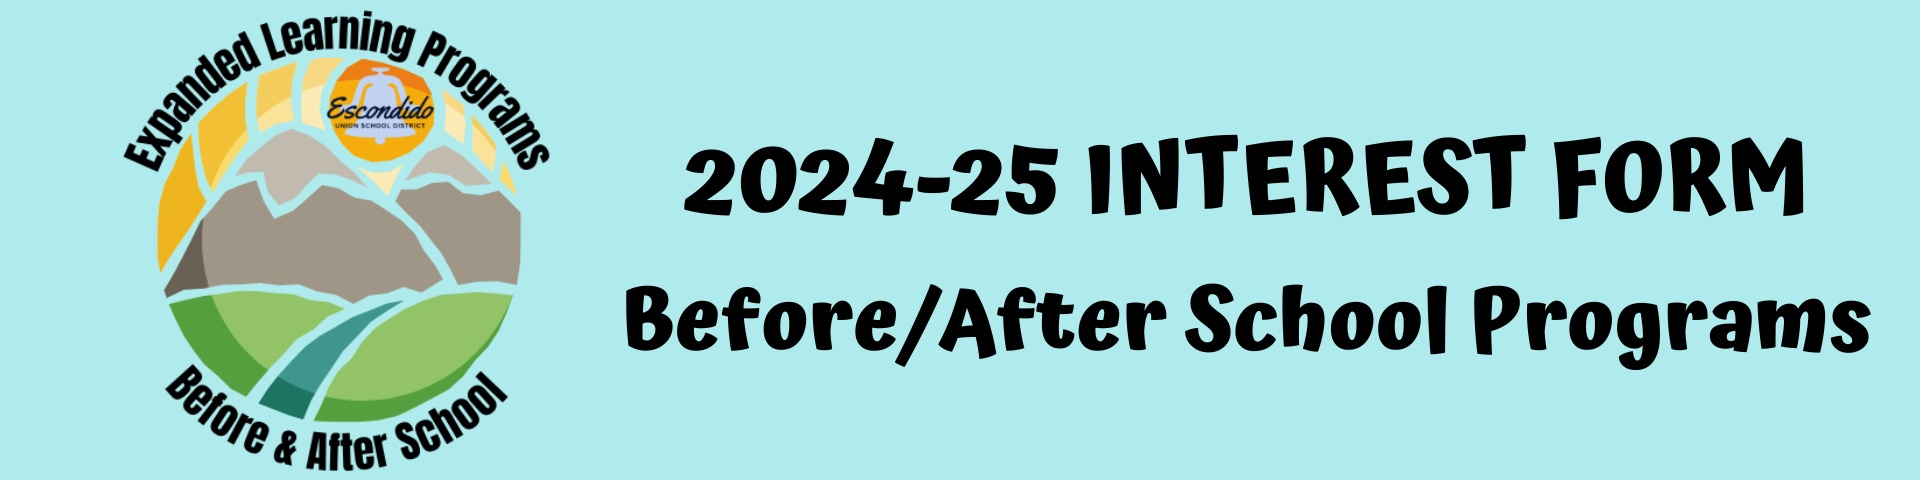 2024-2025 before and after school program interest form